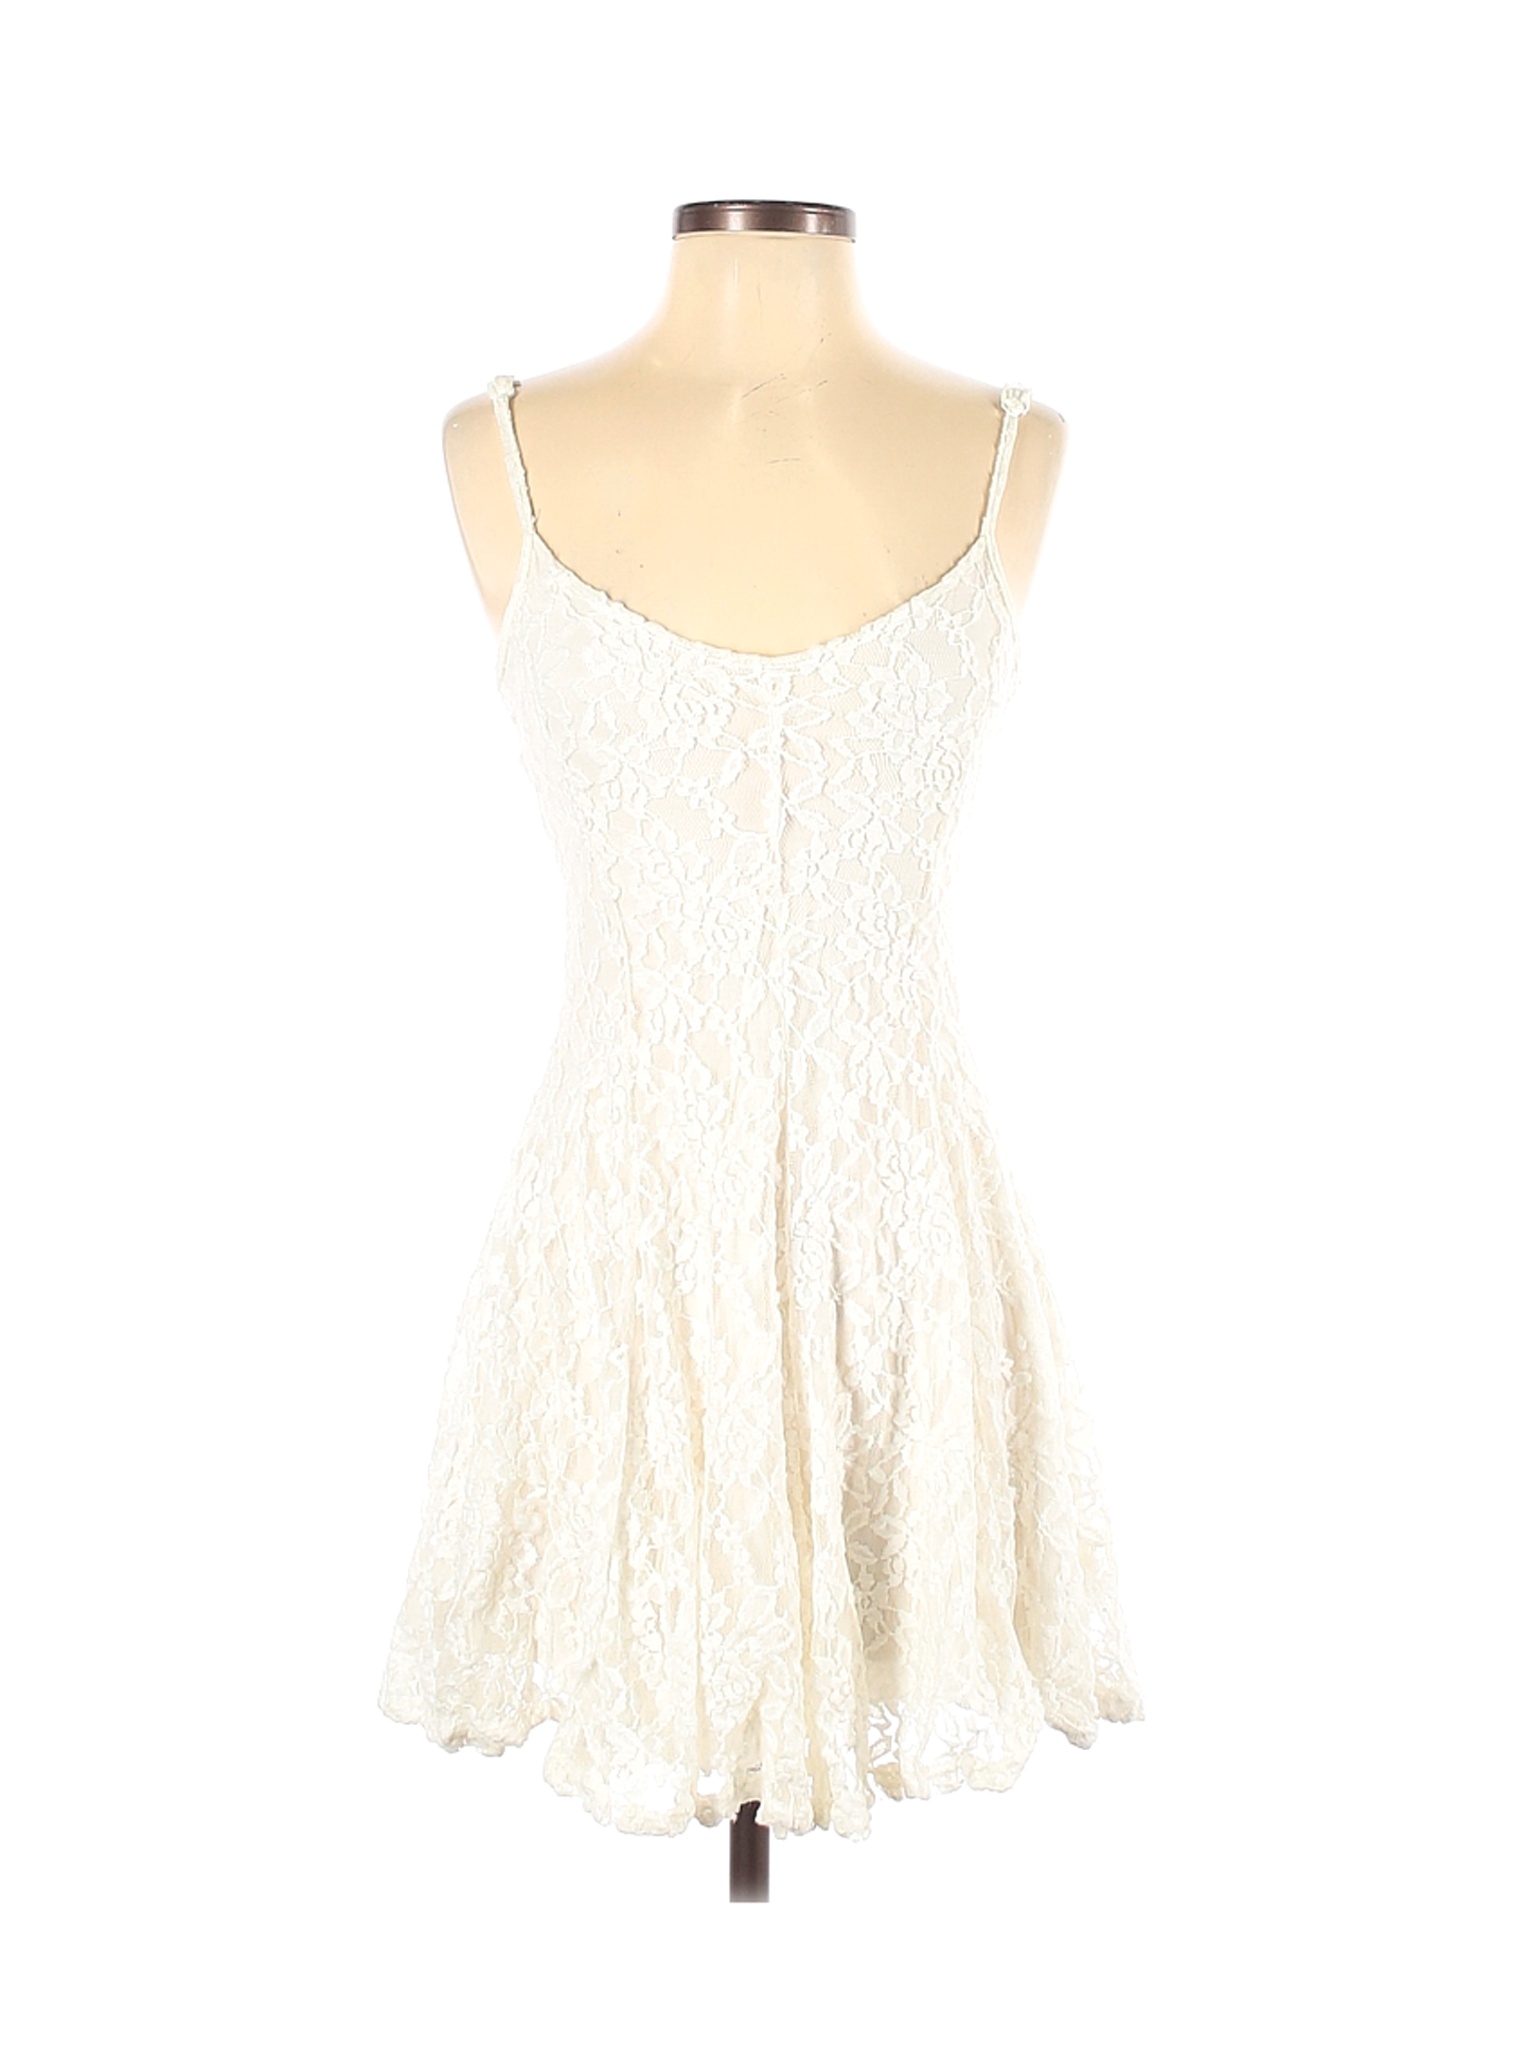 American Eagle Outfitters Women White Casual Dress S | eBay